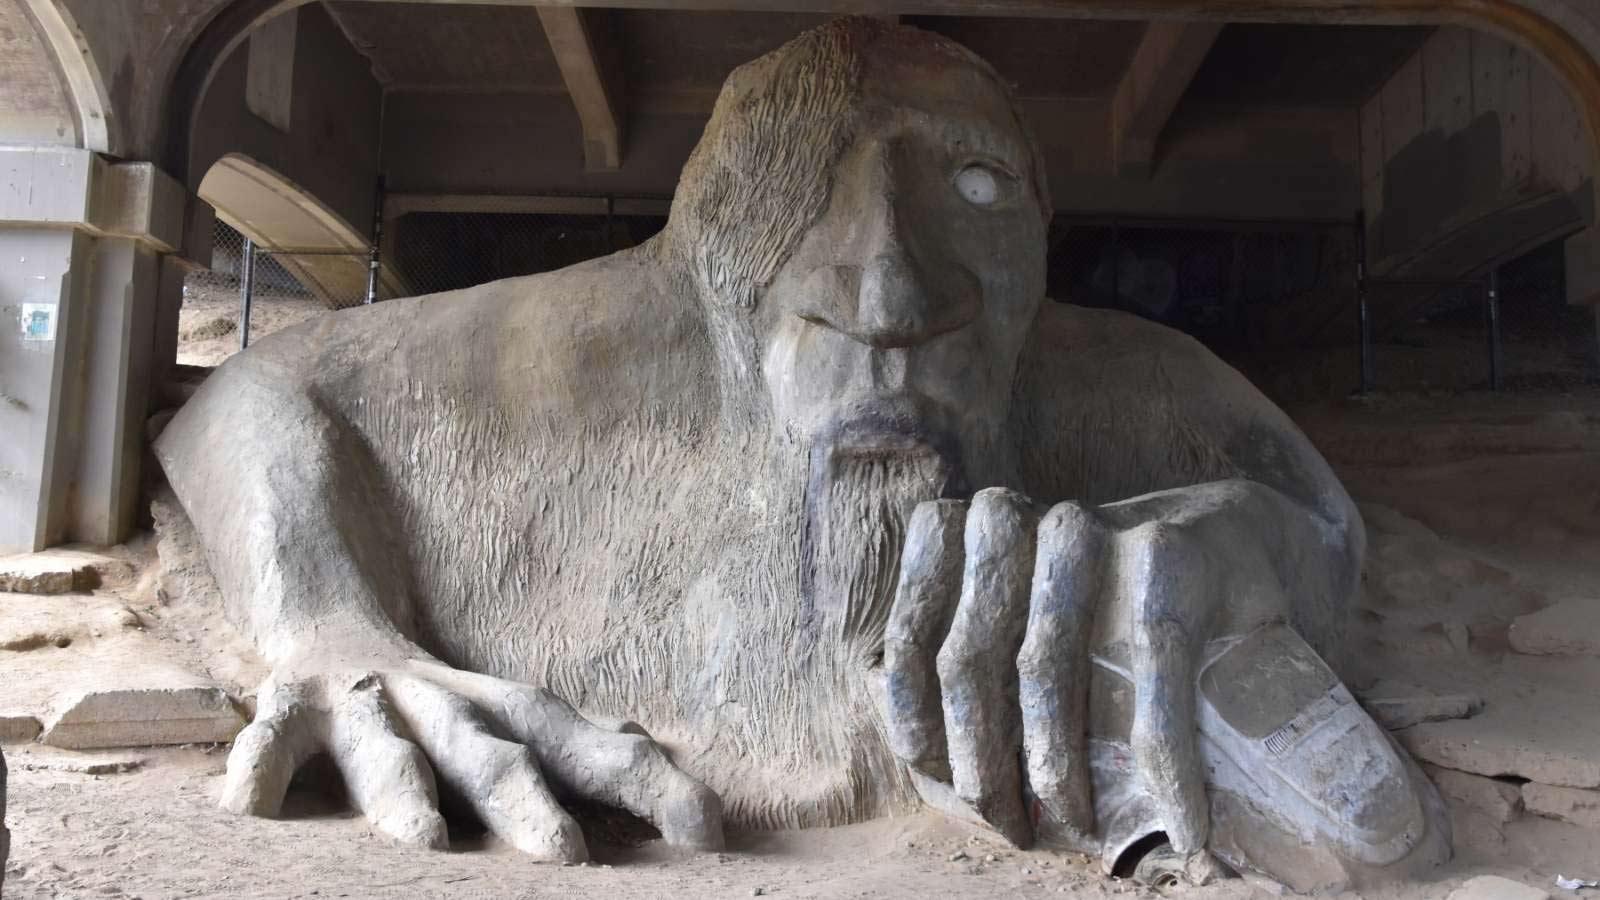 <p>Created in 1989, the Fremont Troll is a sculpture located underneath a bridge, inspired by the folklore tale of “Billy Goats Gruff.” The sculpture was created as part of an art competition to revitalize the area underneath the bridge, which had previously been a dumping ground and a place where drugs were sold.</p>